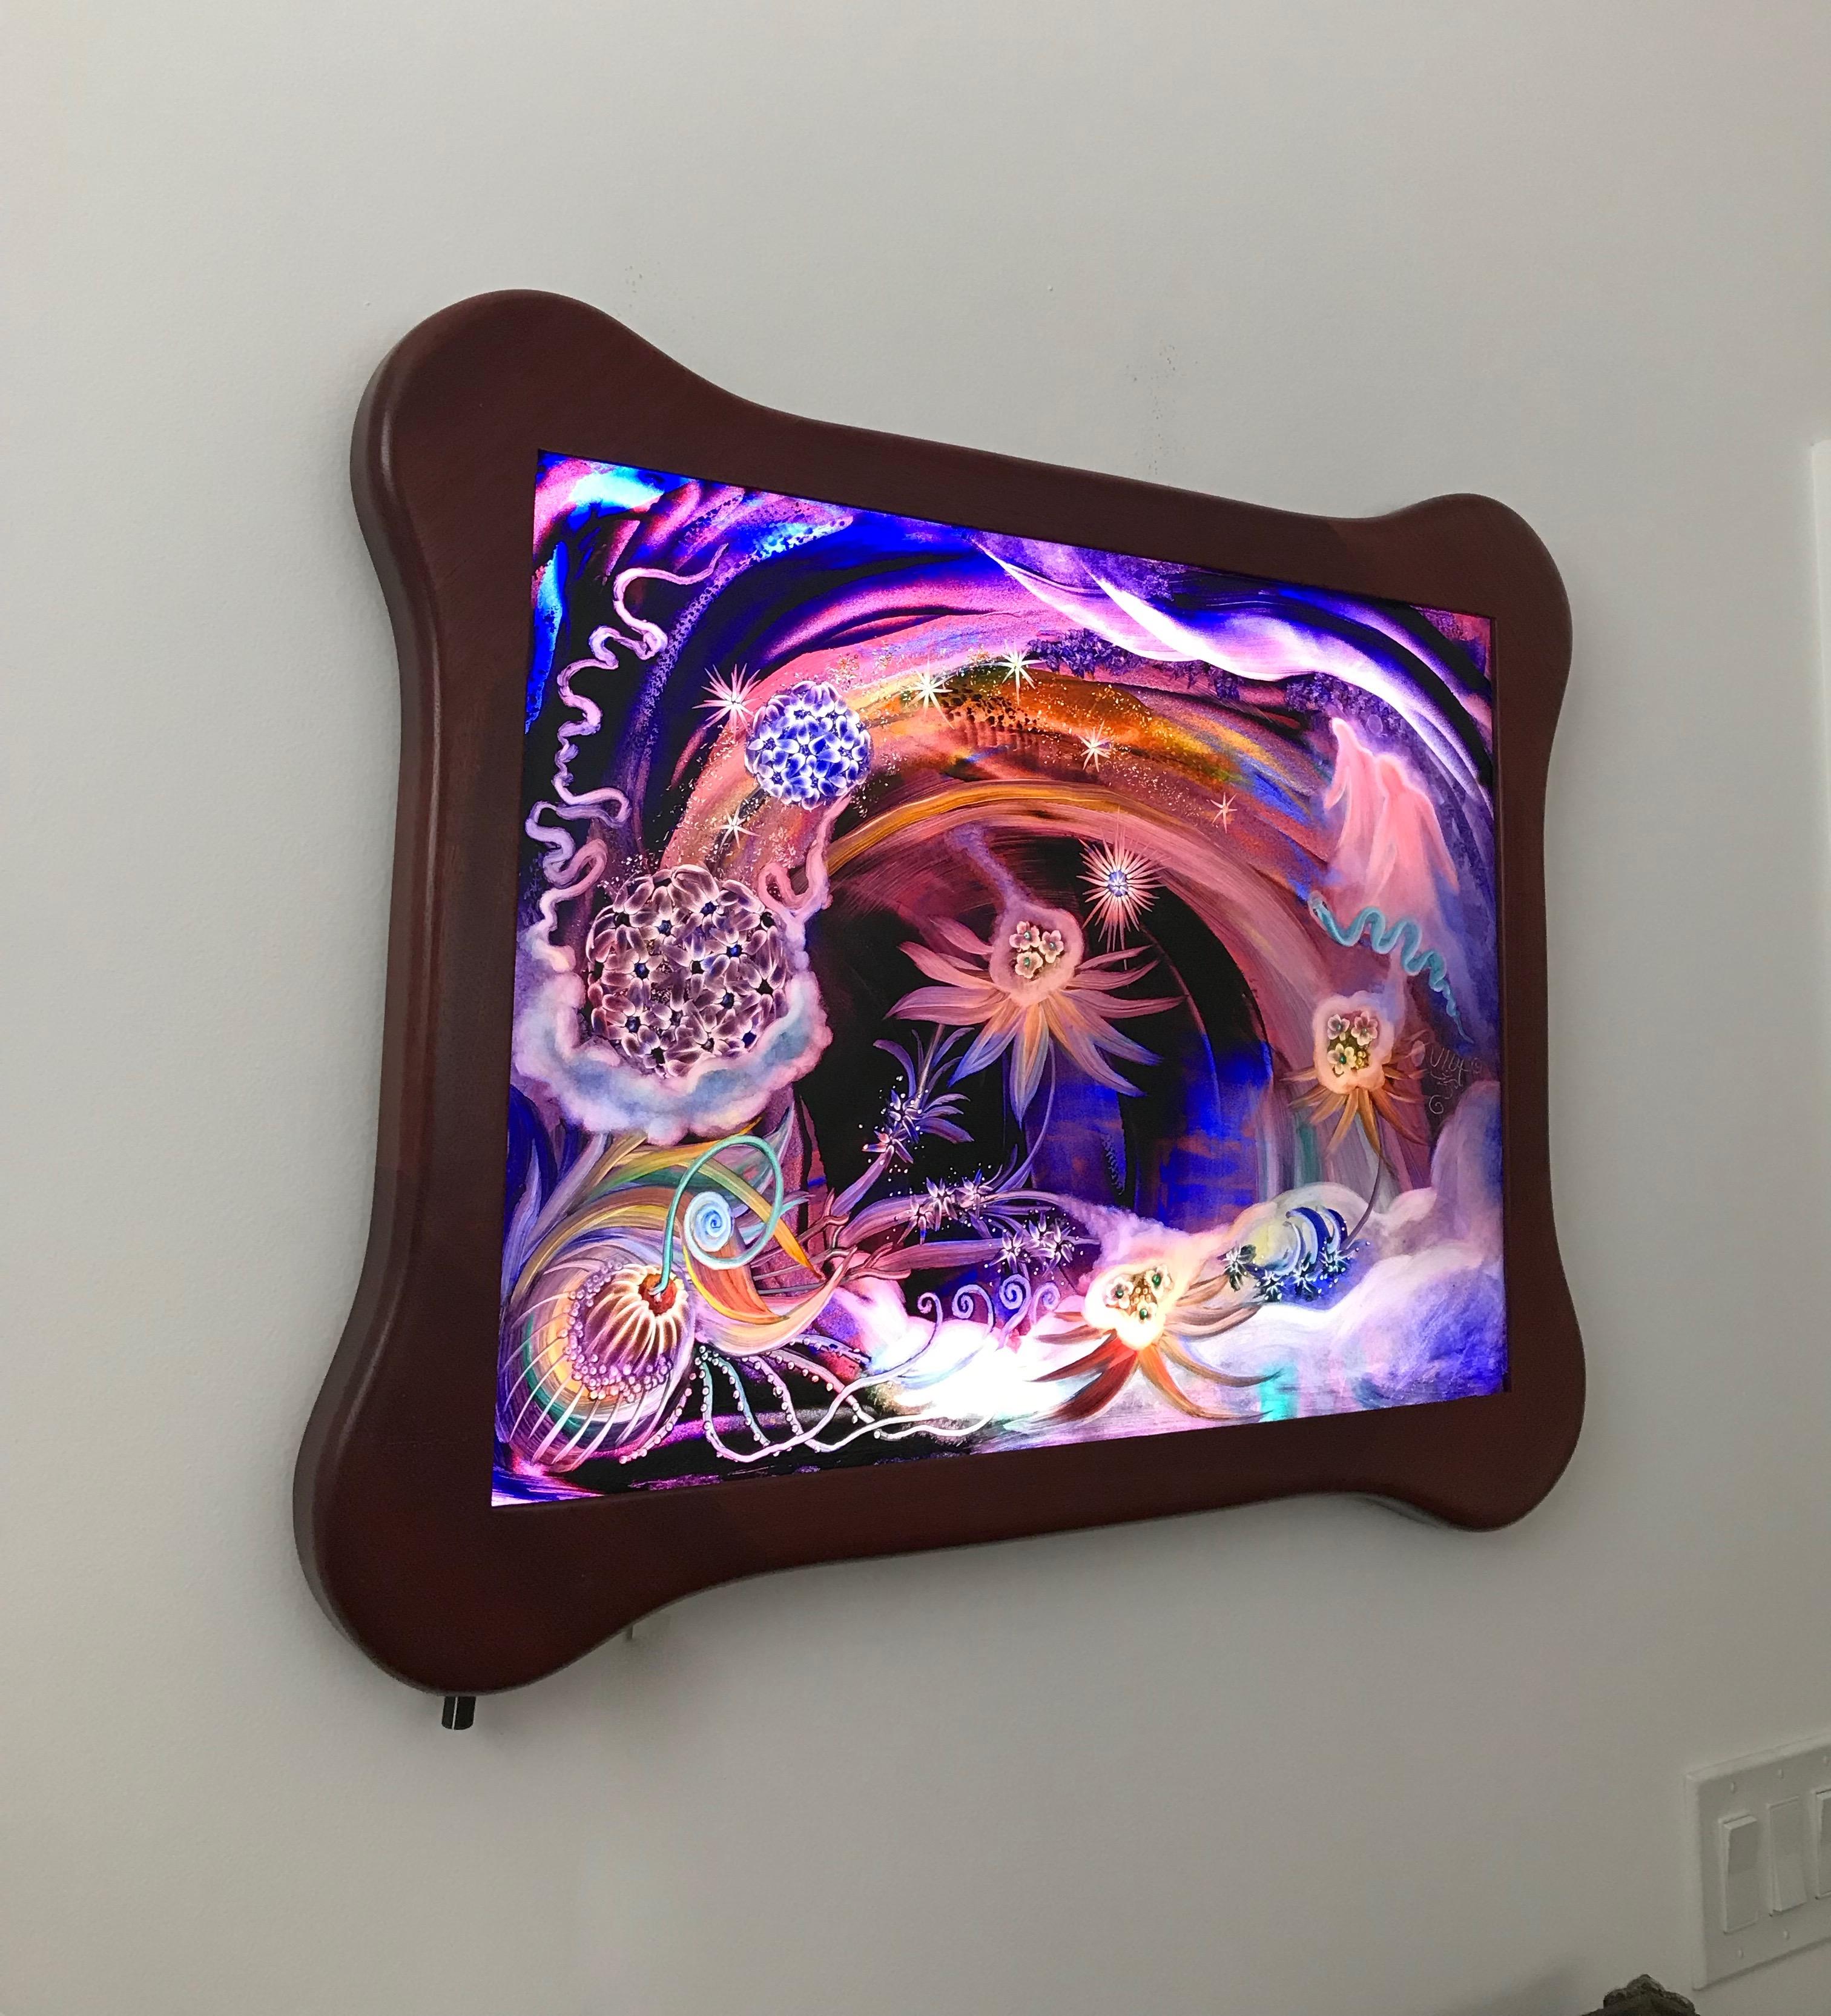 This gorgeous signed original Ulla Darni flat glass painting is reverse painted on glass with wood frame. Ulla starts with a blank glass surface to paint on. She uses vibrant colors that pop off the glass, making it feel like the painting is alive.